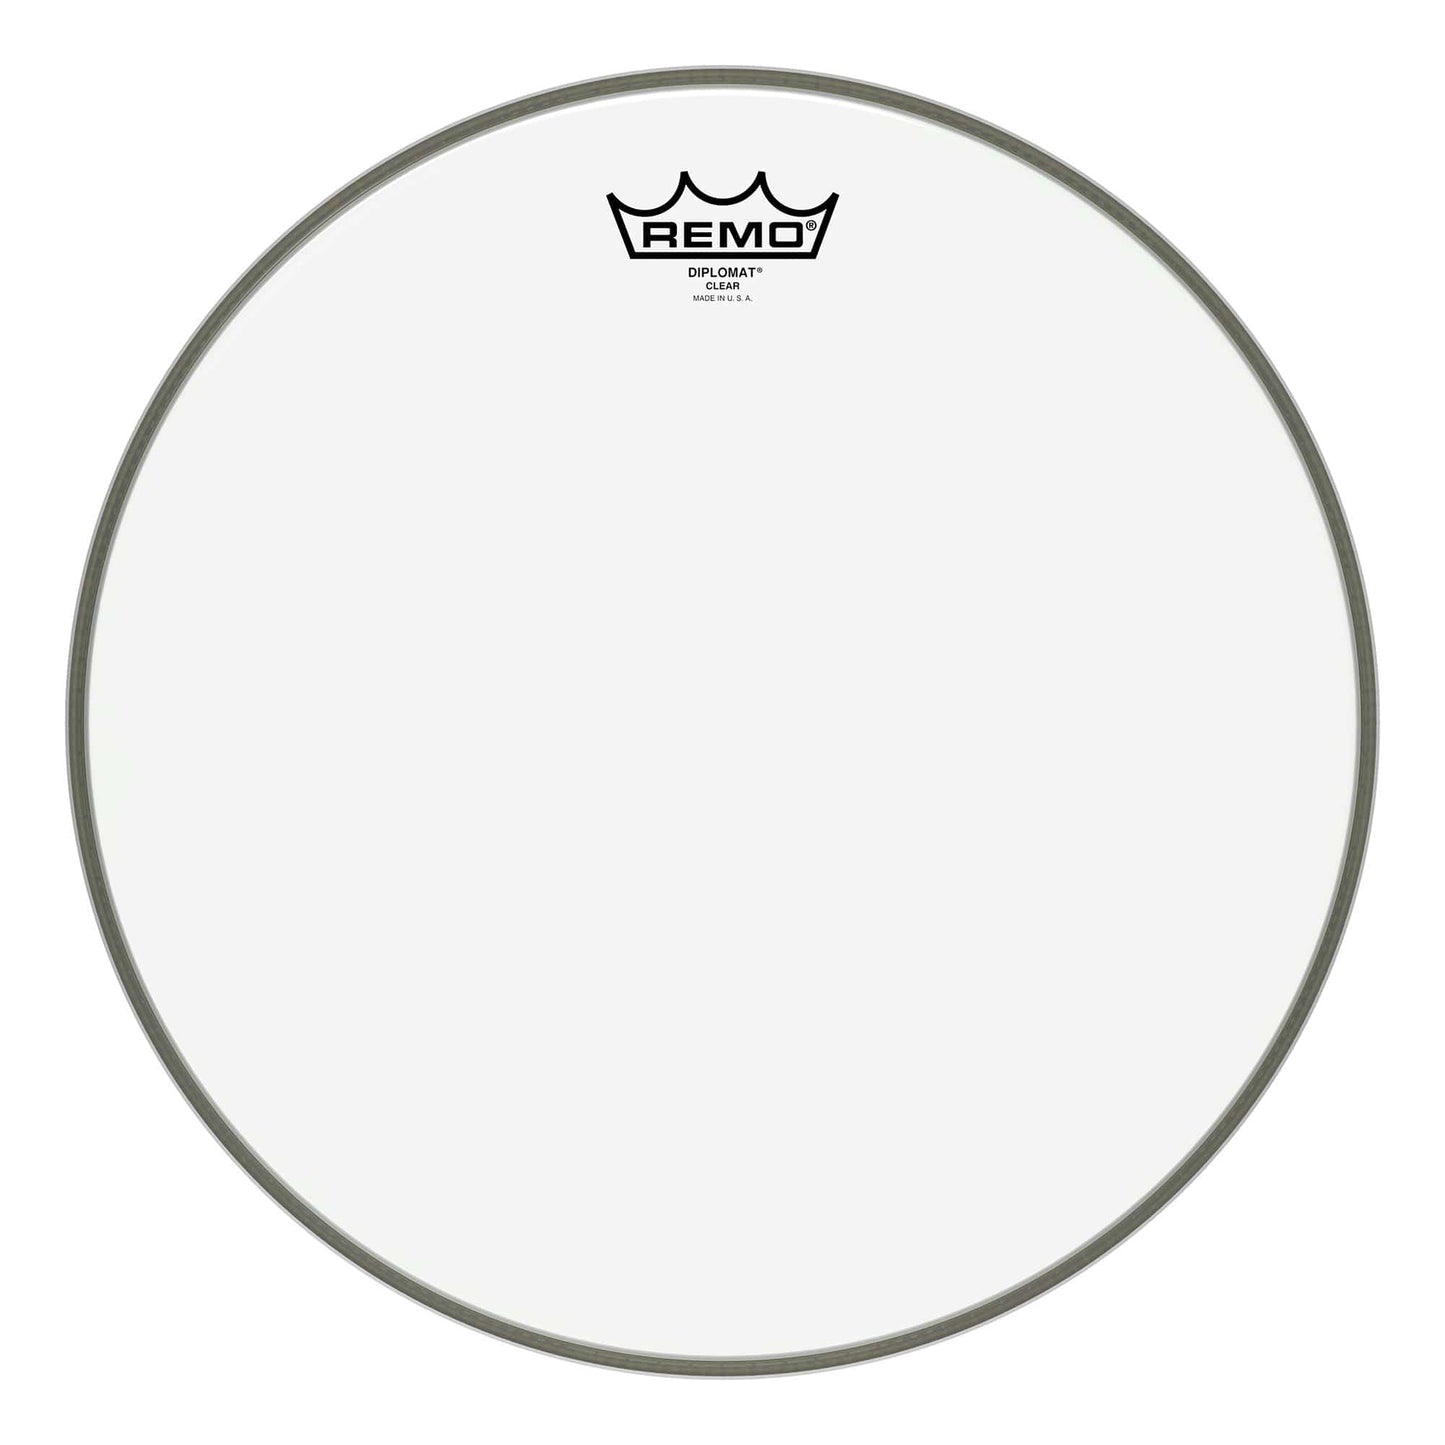 Remo 14" Clear Diplomat Tom/snare Drumhead